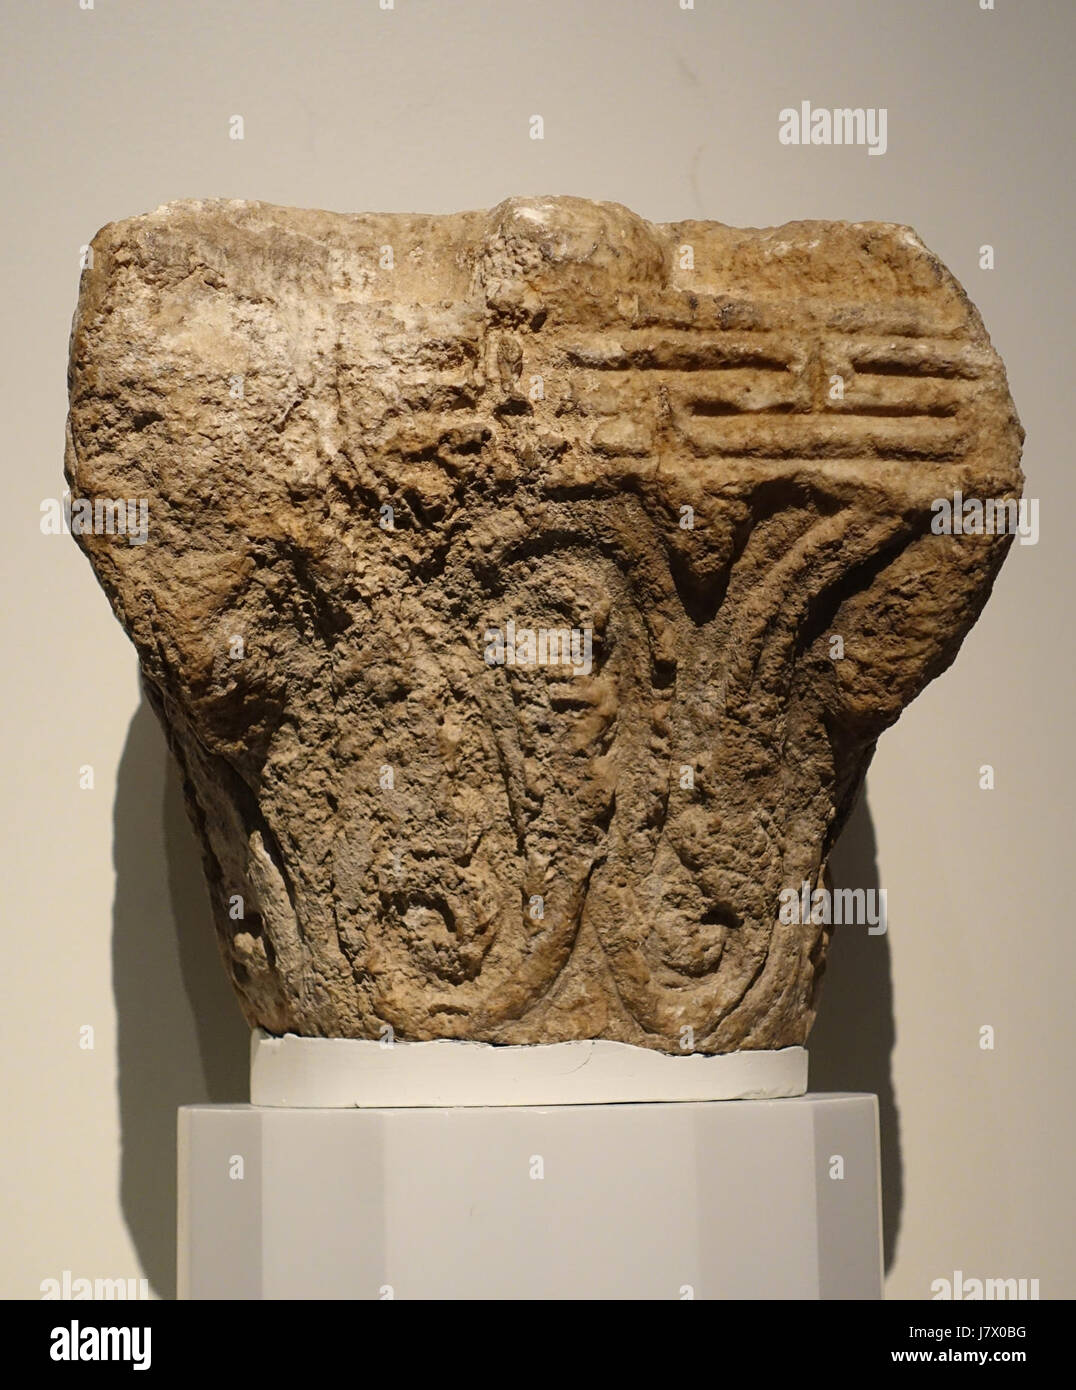 Column capital, Historic Syria, late 7th to early 8th century AD, marble, 2 of 2   Aga Khan Museum   Toronto, Canada   DSC06314 Stock Photo